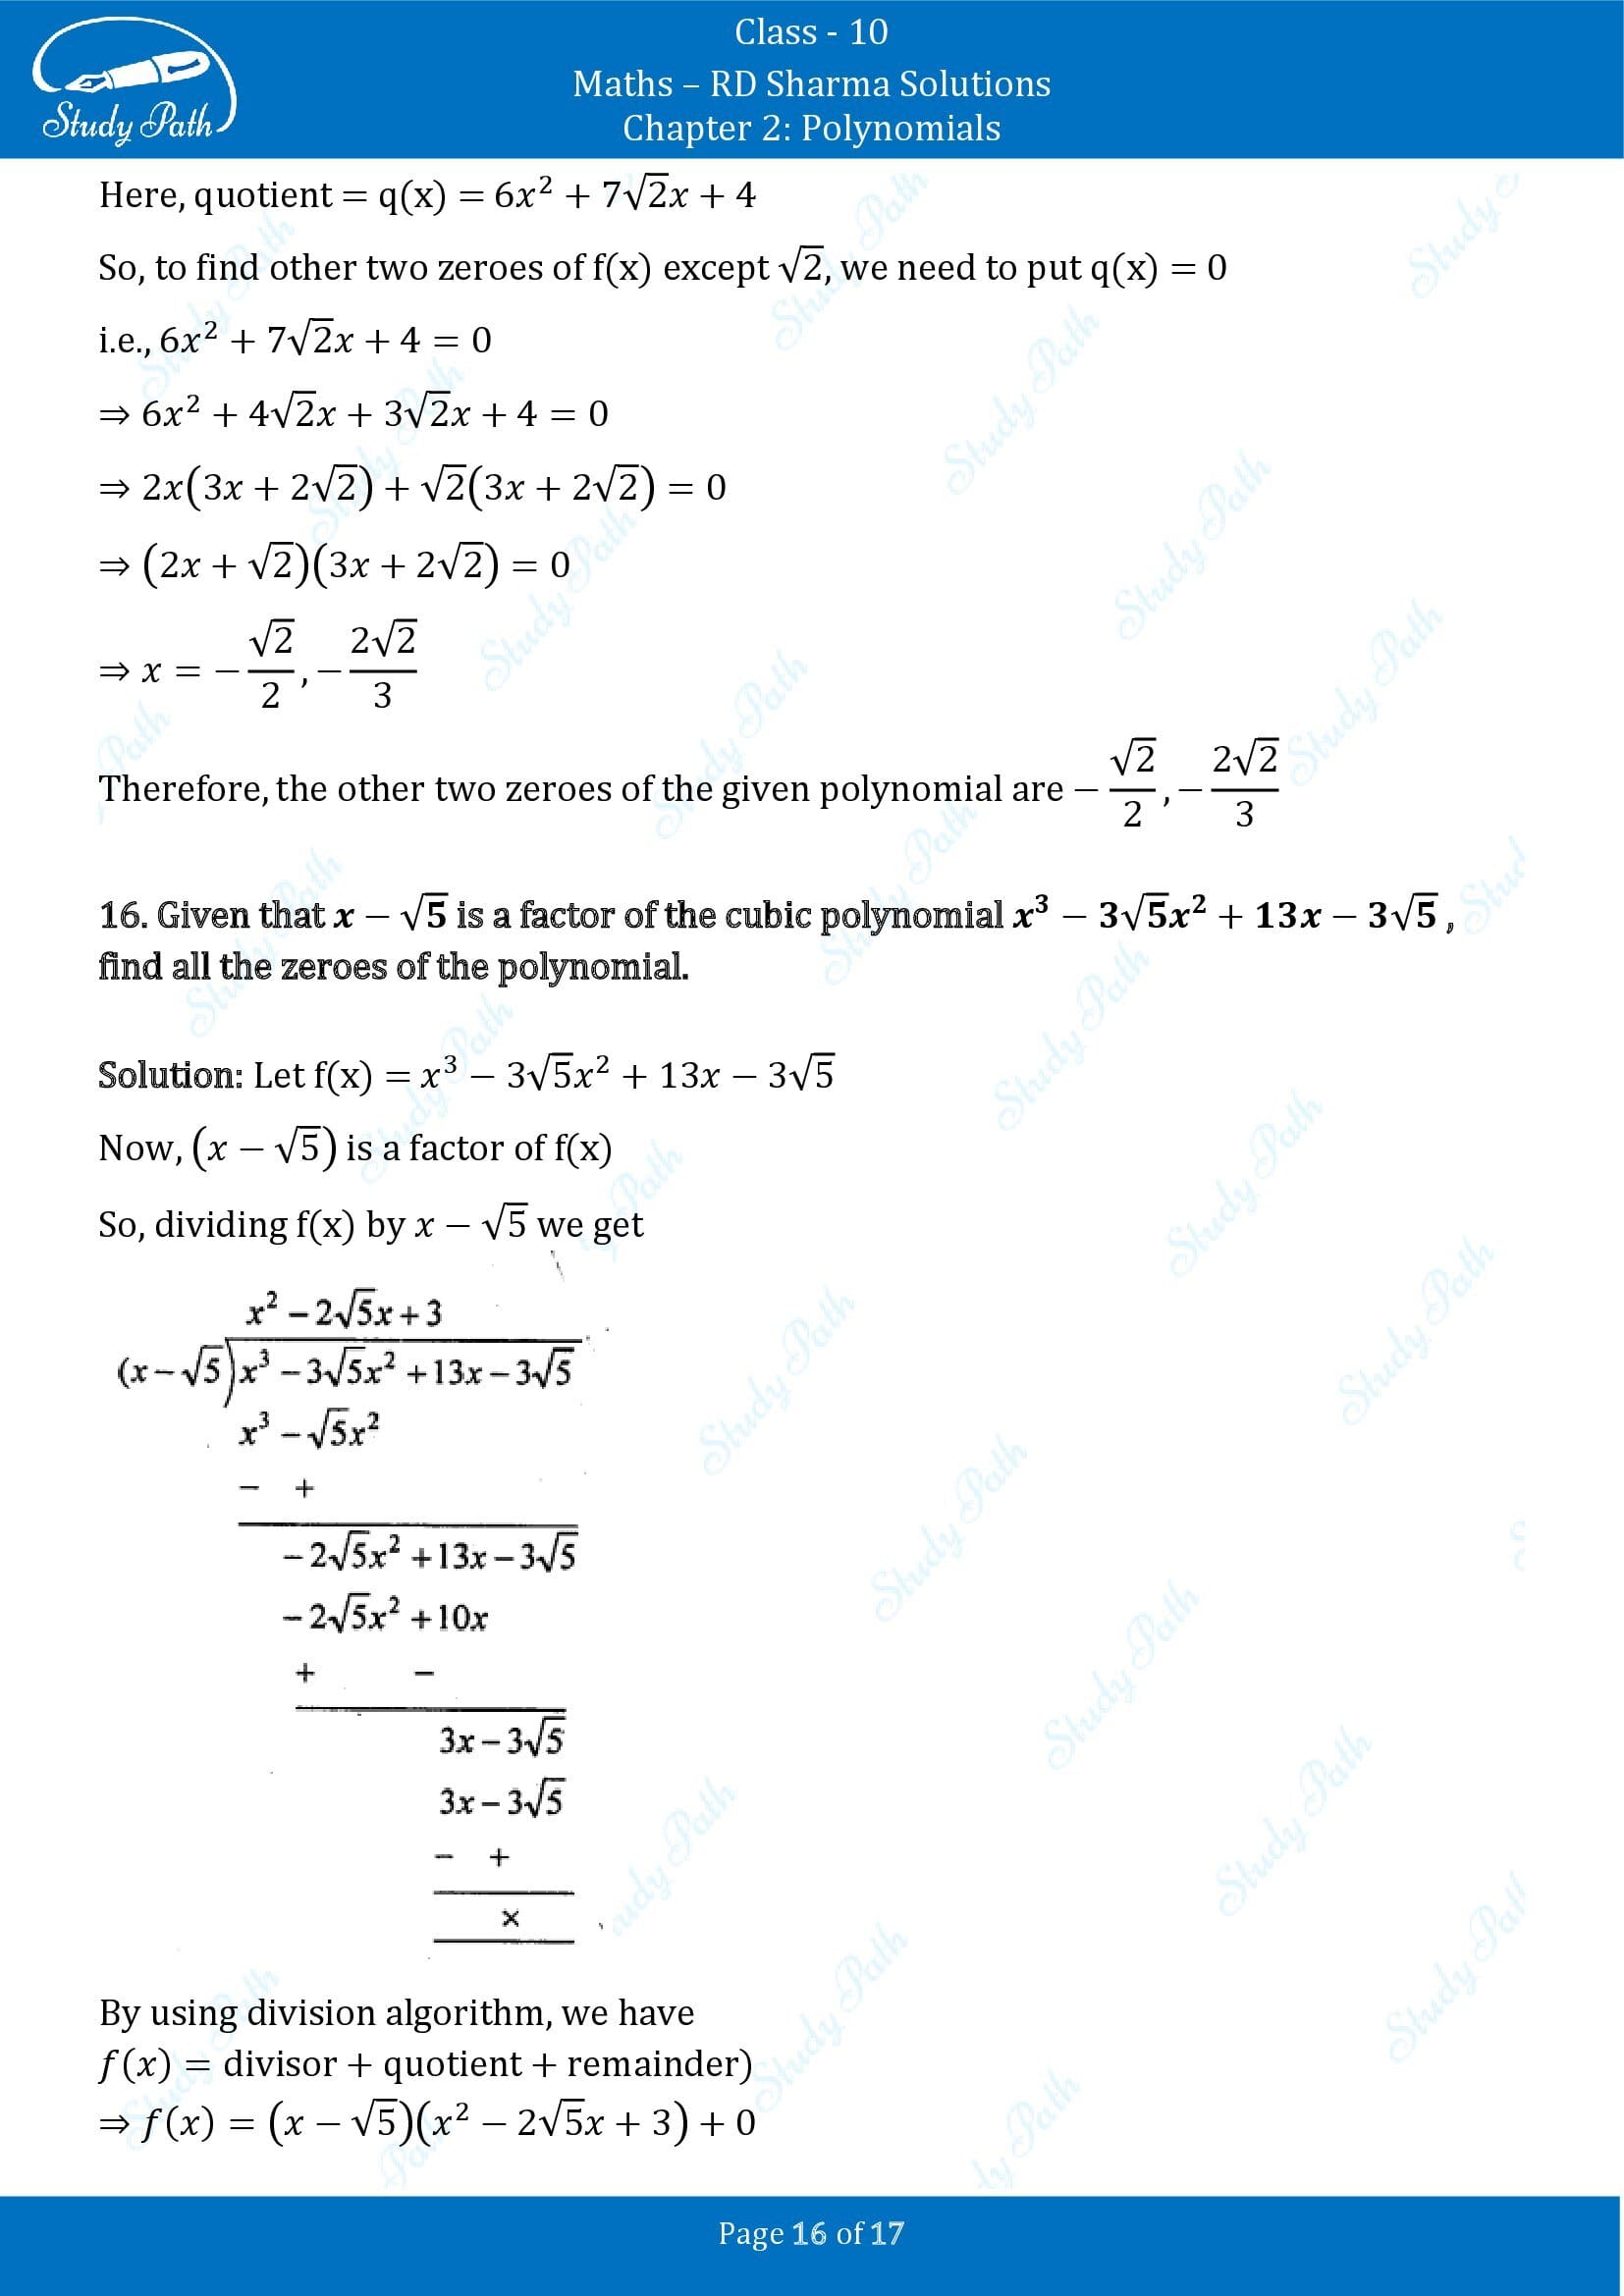 RD Sharma Solutions Class 10 Chapter 2 Polynomials Exercise 2.3 00016